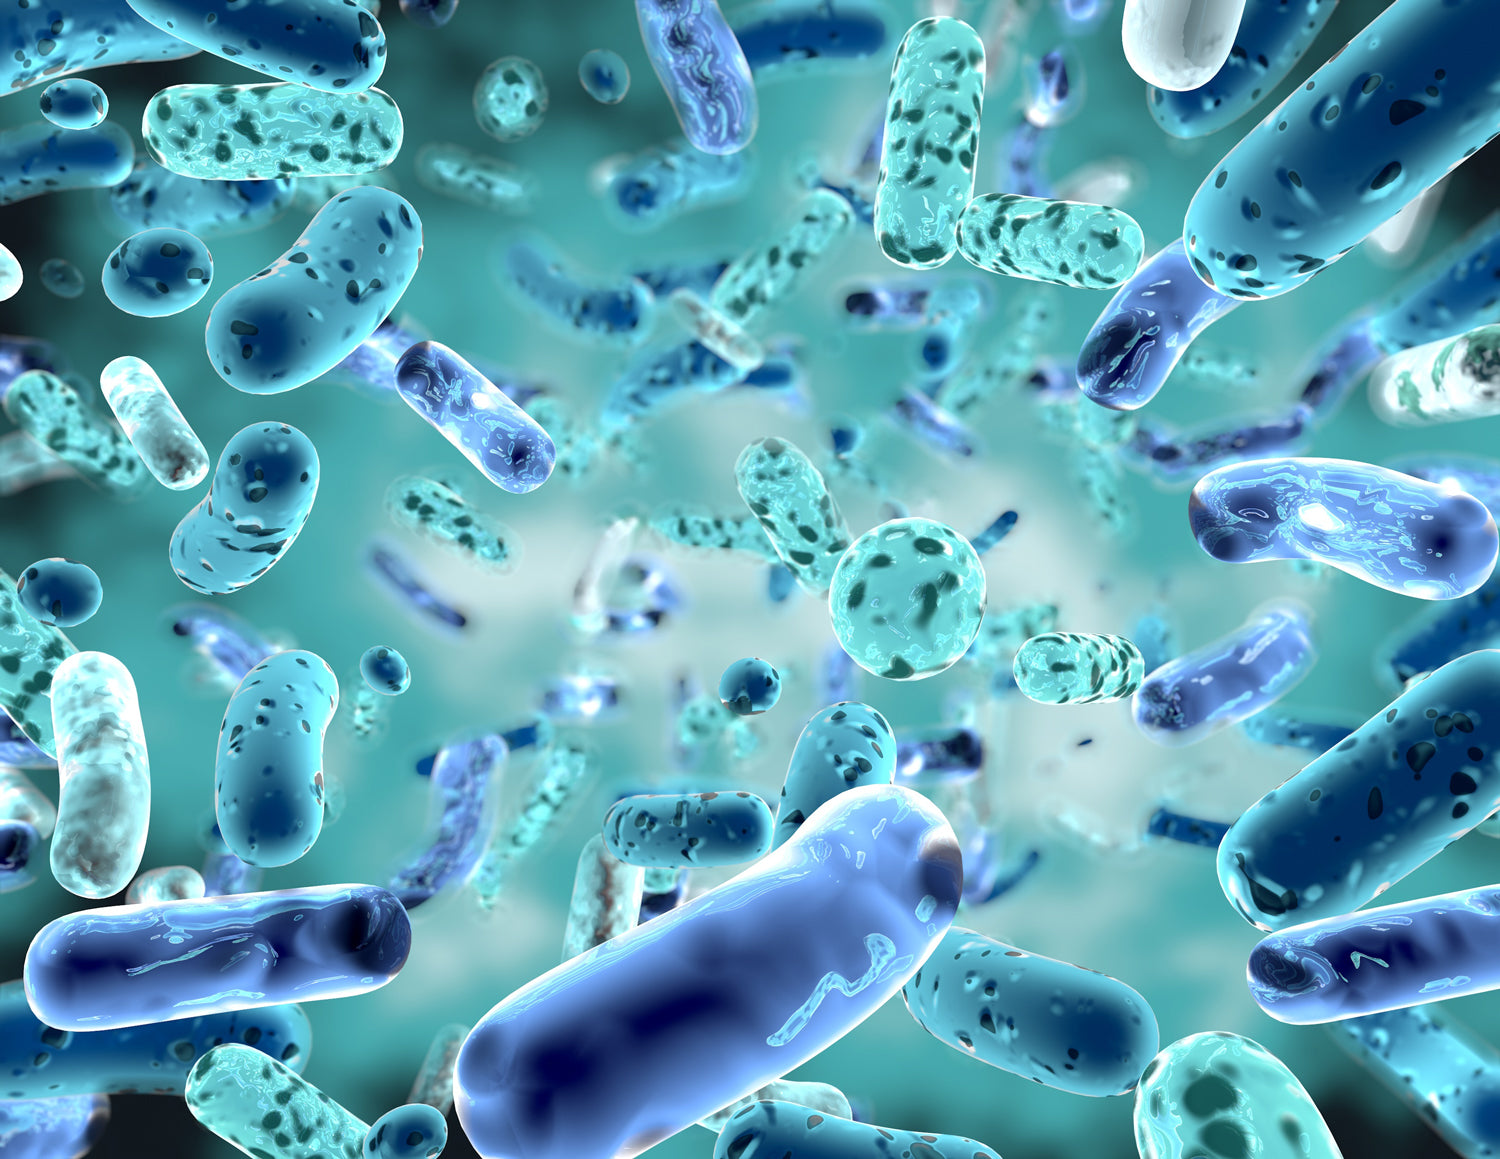 Prebiotics and Probiotics | What Are They, And Should I be Taking Them?